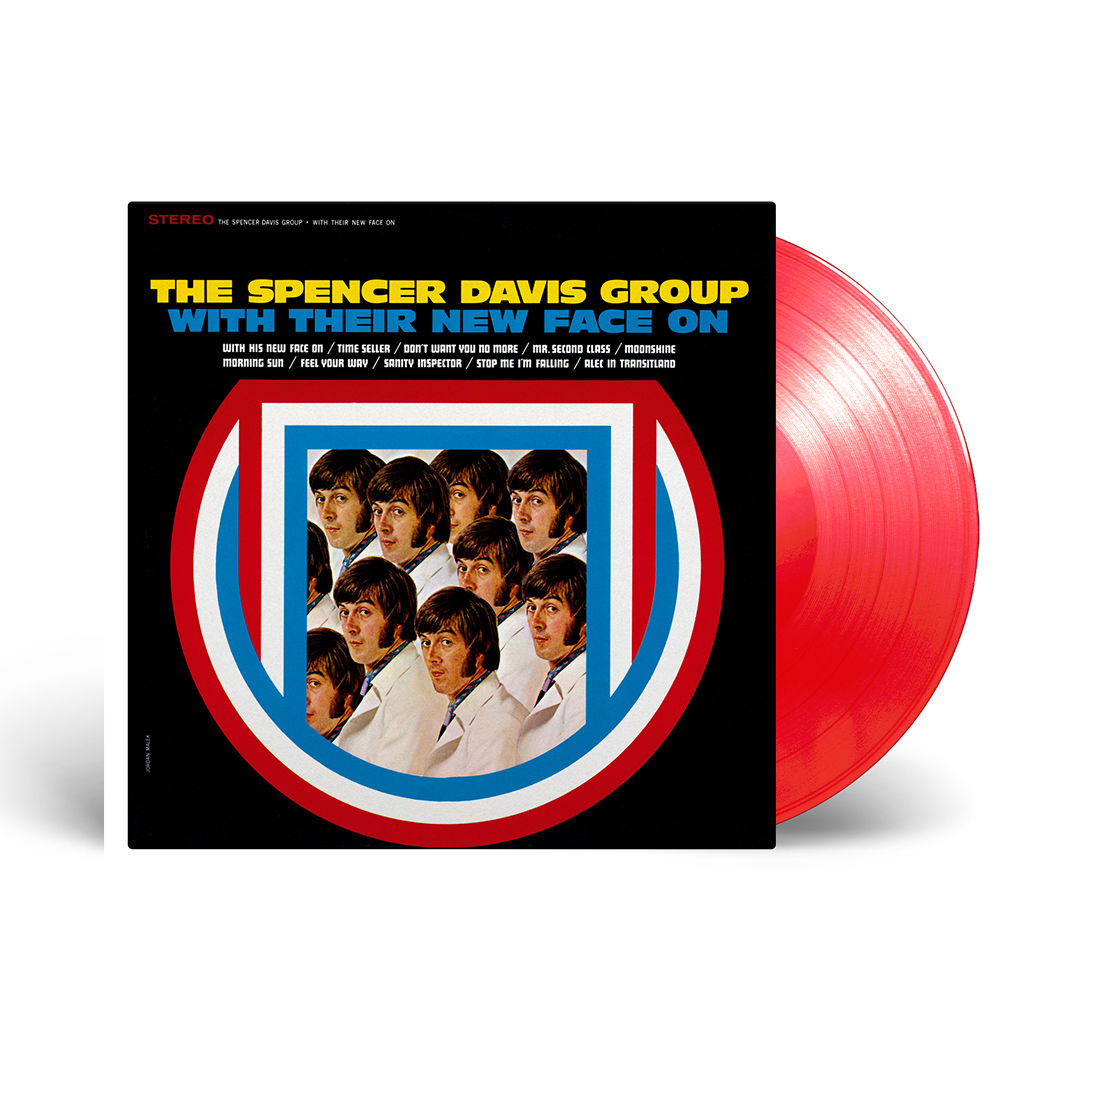 With Their New Face On: Limited Red Vinyl LP